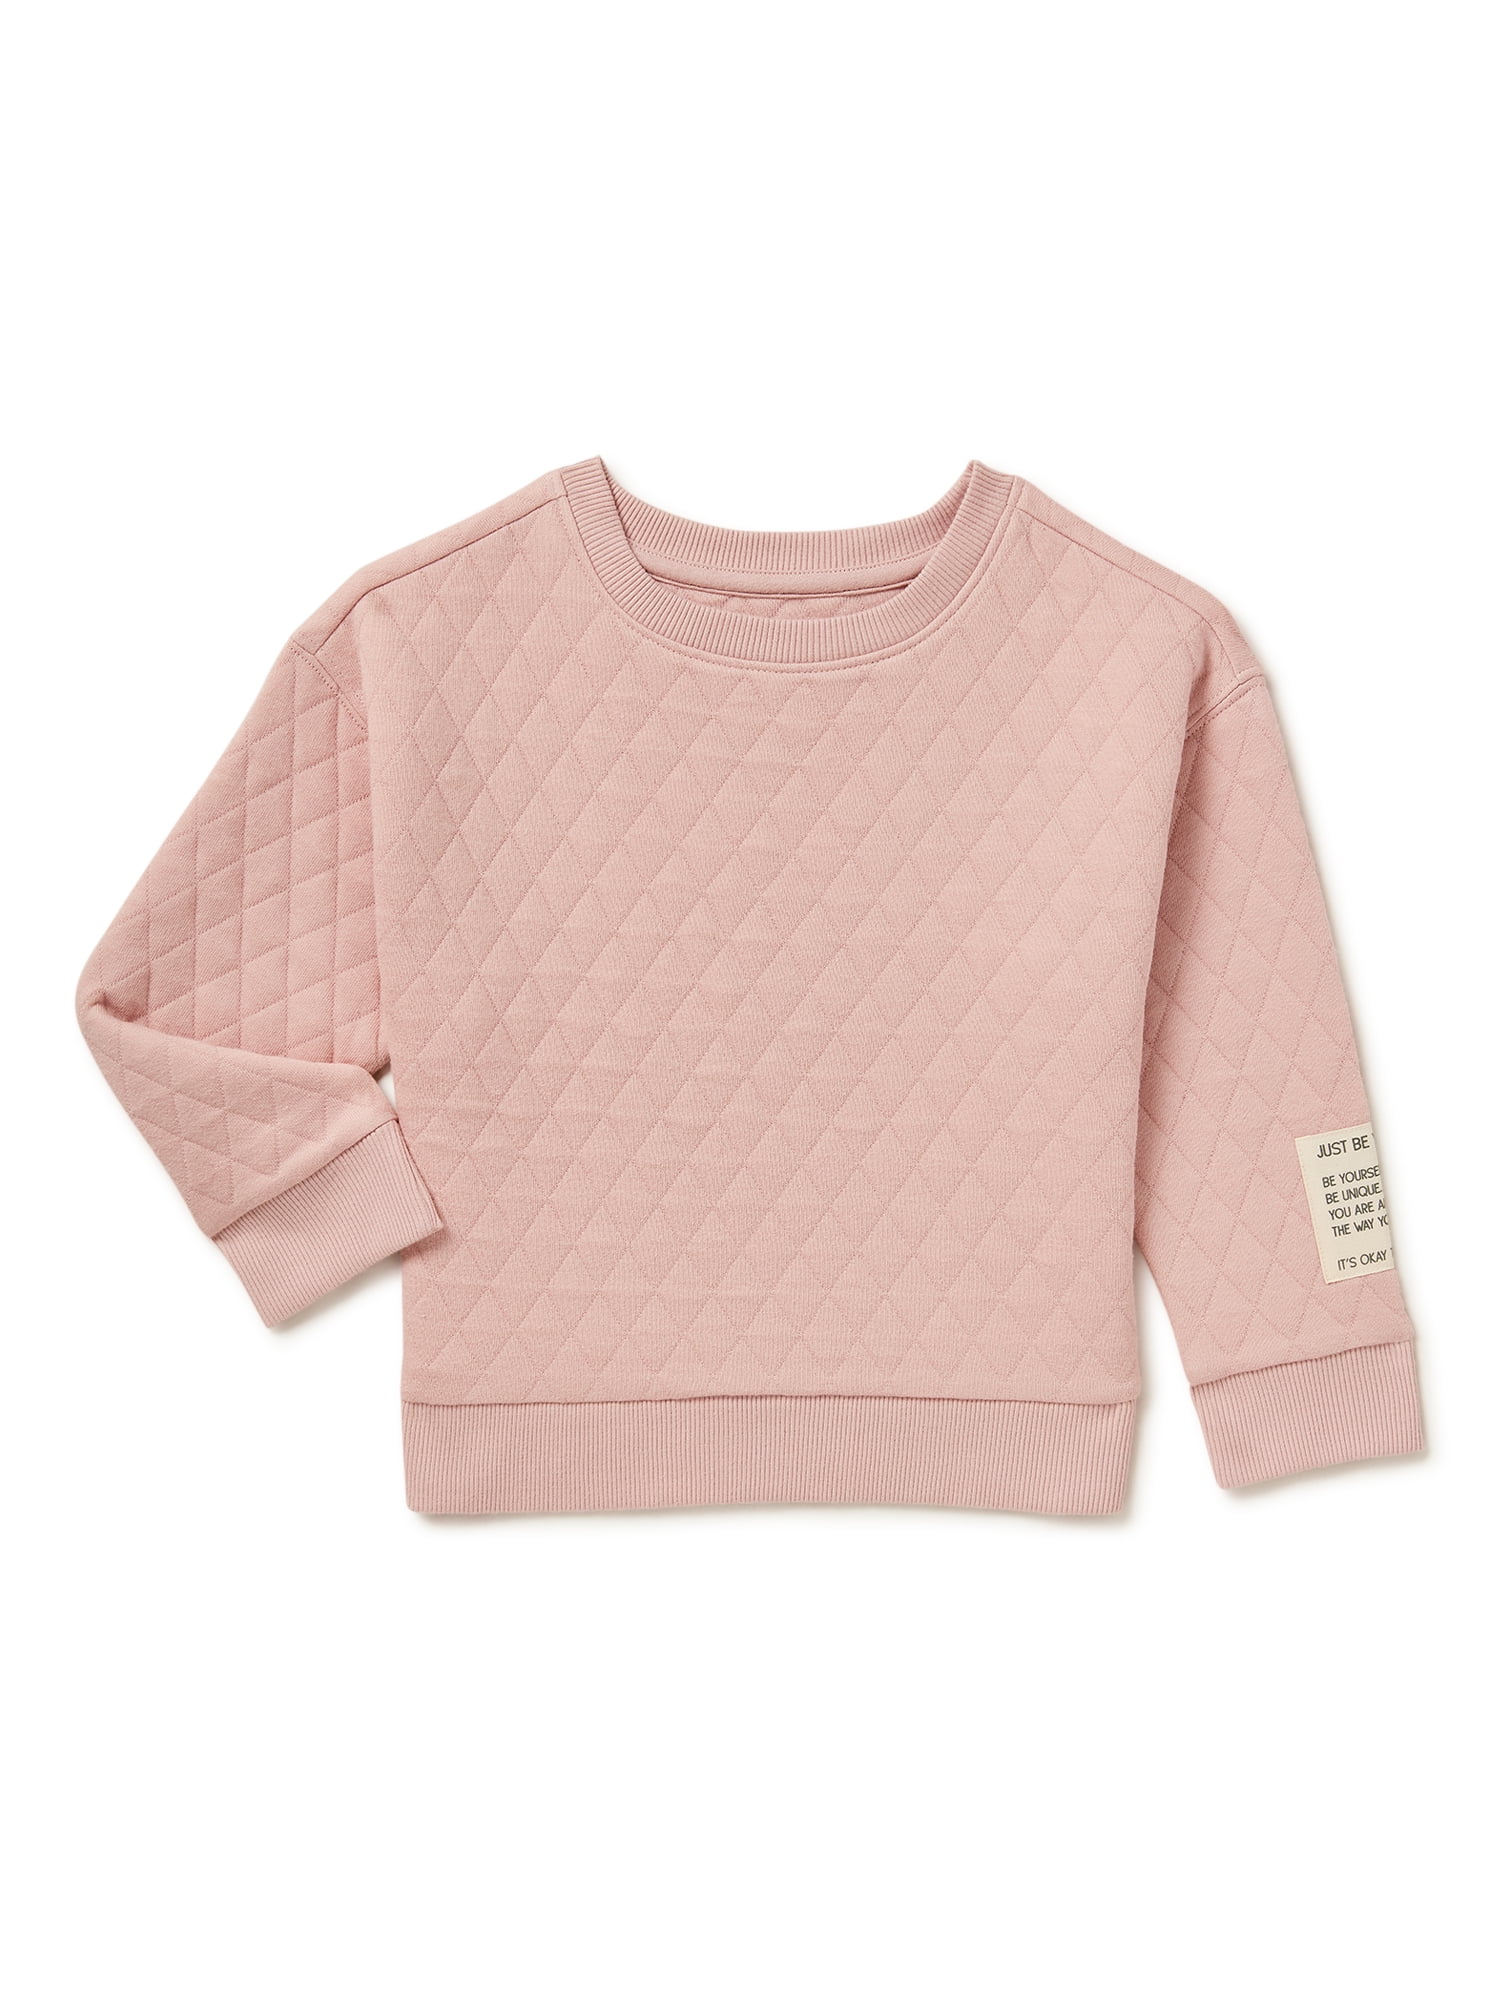 easy-peasy Baby and Toddler Girls Quilted Sweatshirt, Sizes 12 Months-5T